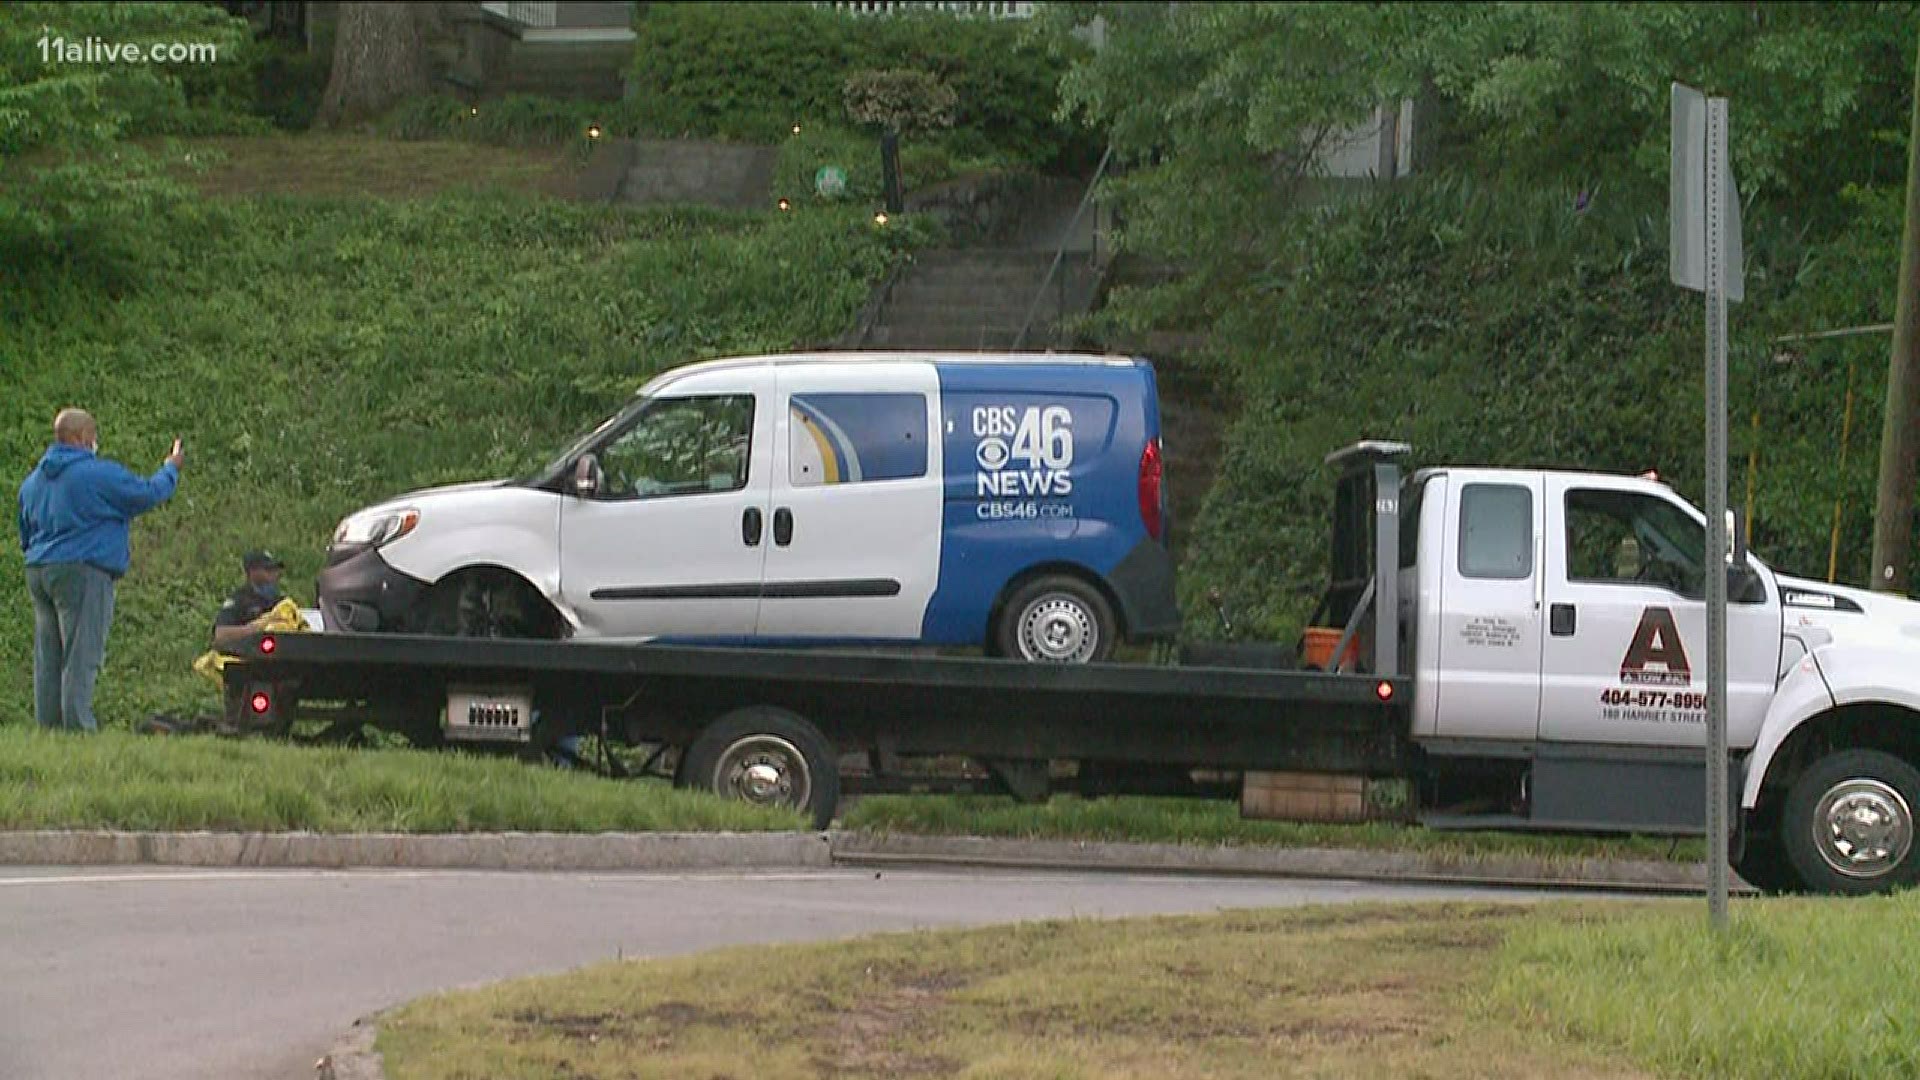 A news van was stolen in Atlanta on Tuesday morning as a pregnant CBS46 reporter was still inside, according to police.